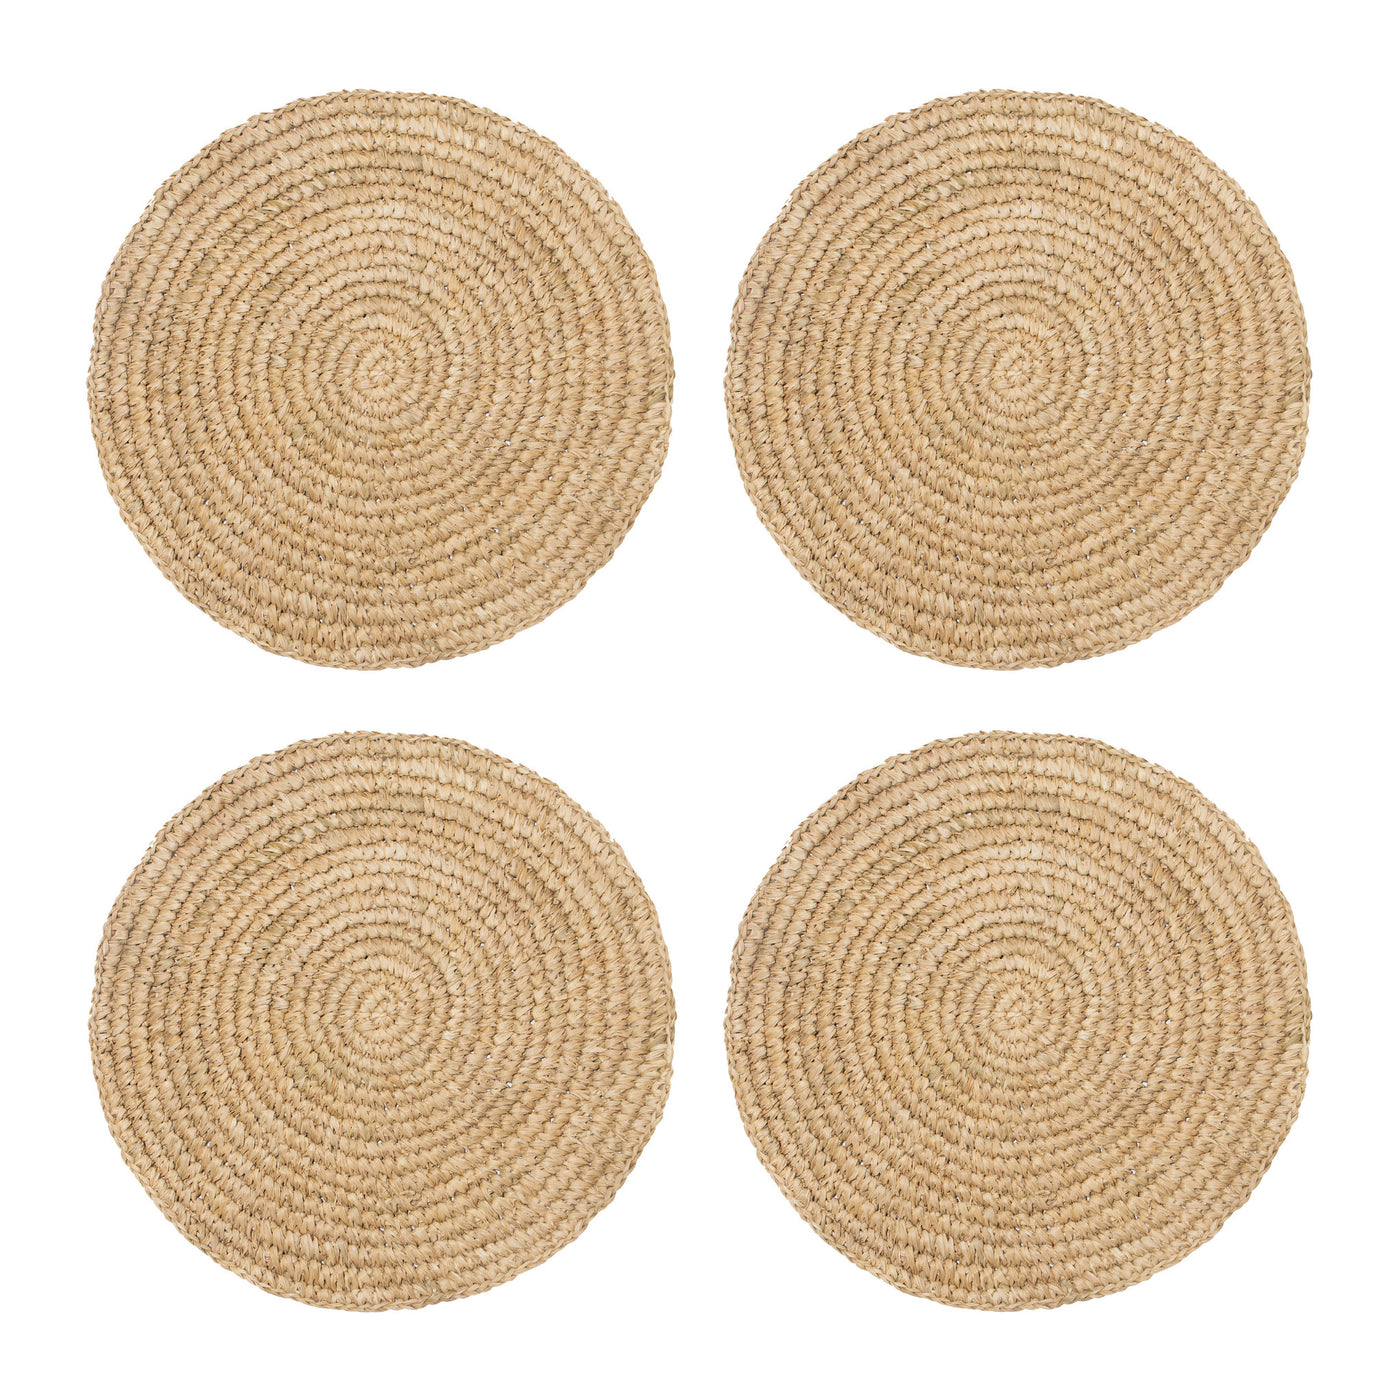 Classic Round Natural Round Placemat 15" - Set of 4